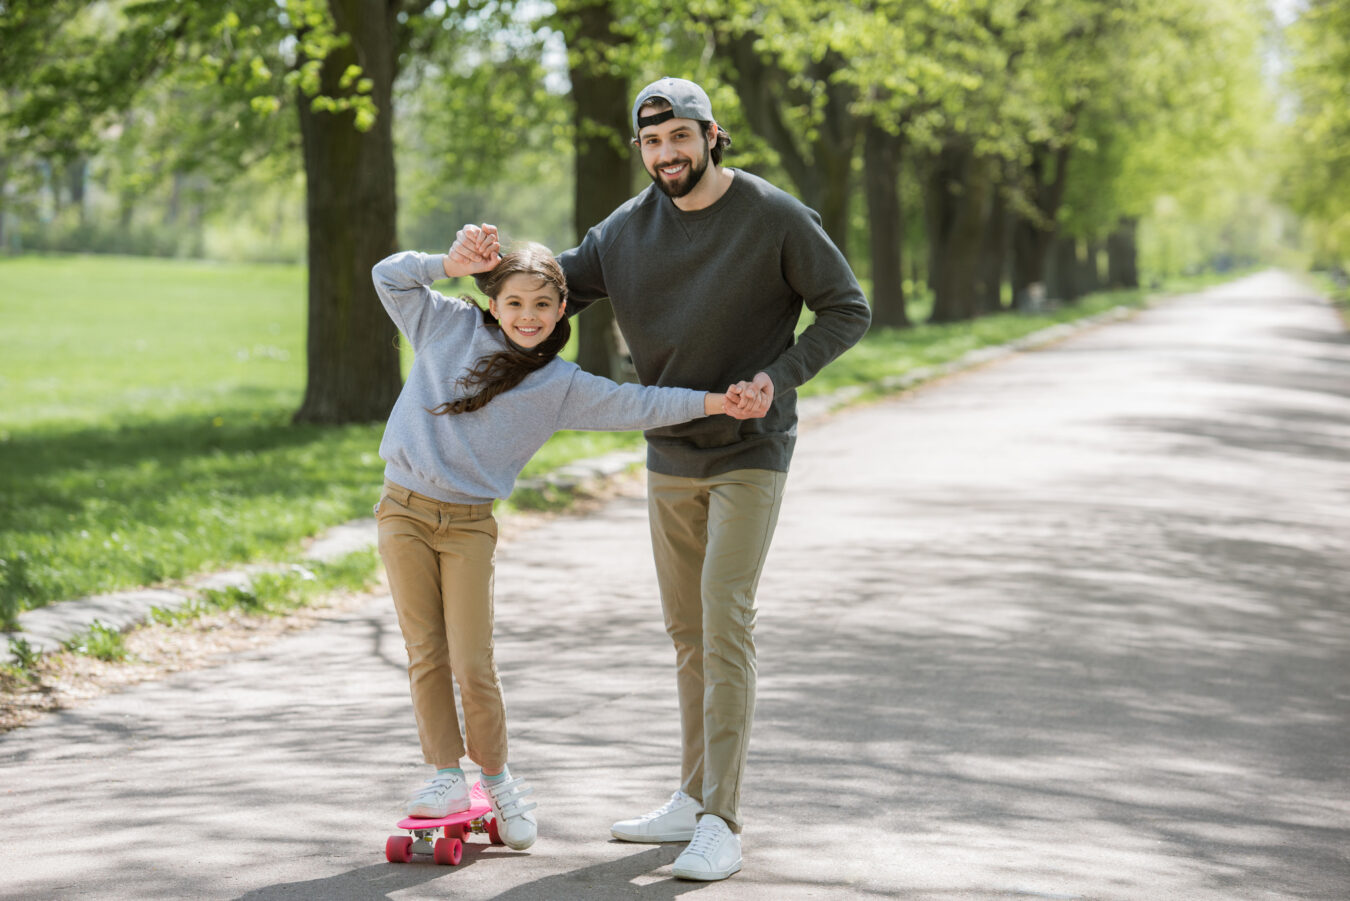 , Skateboards 101: 7 Things Parents Need To Know, Days of a Domestic Dad